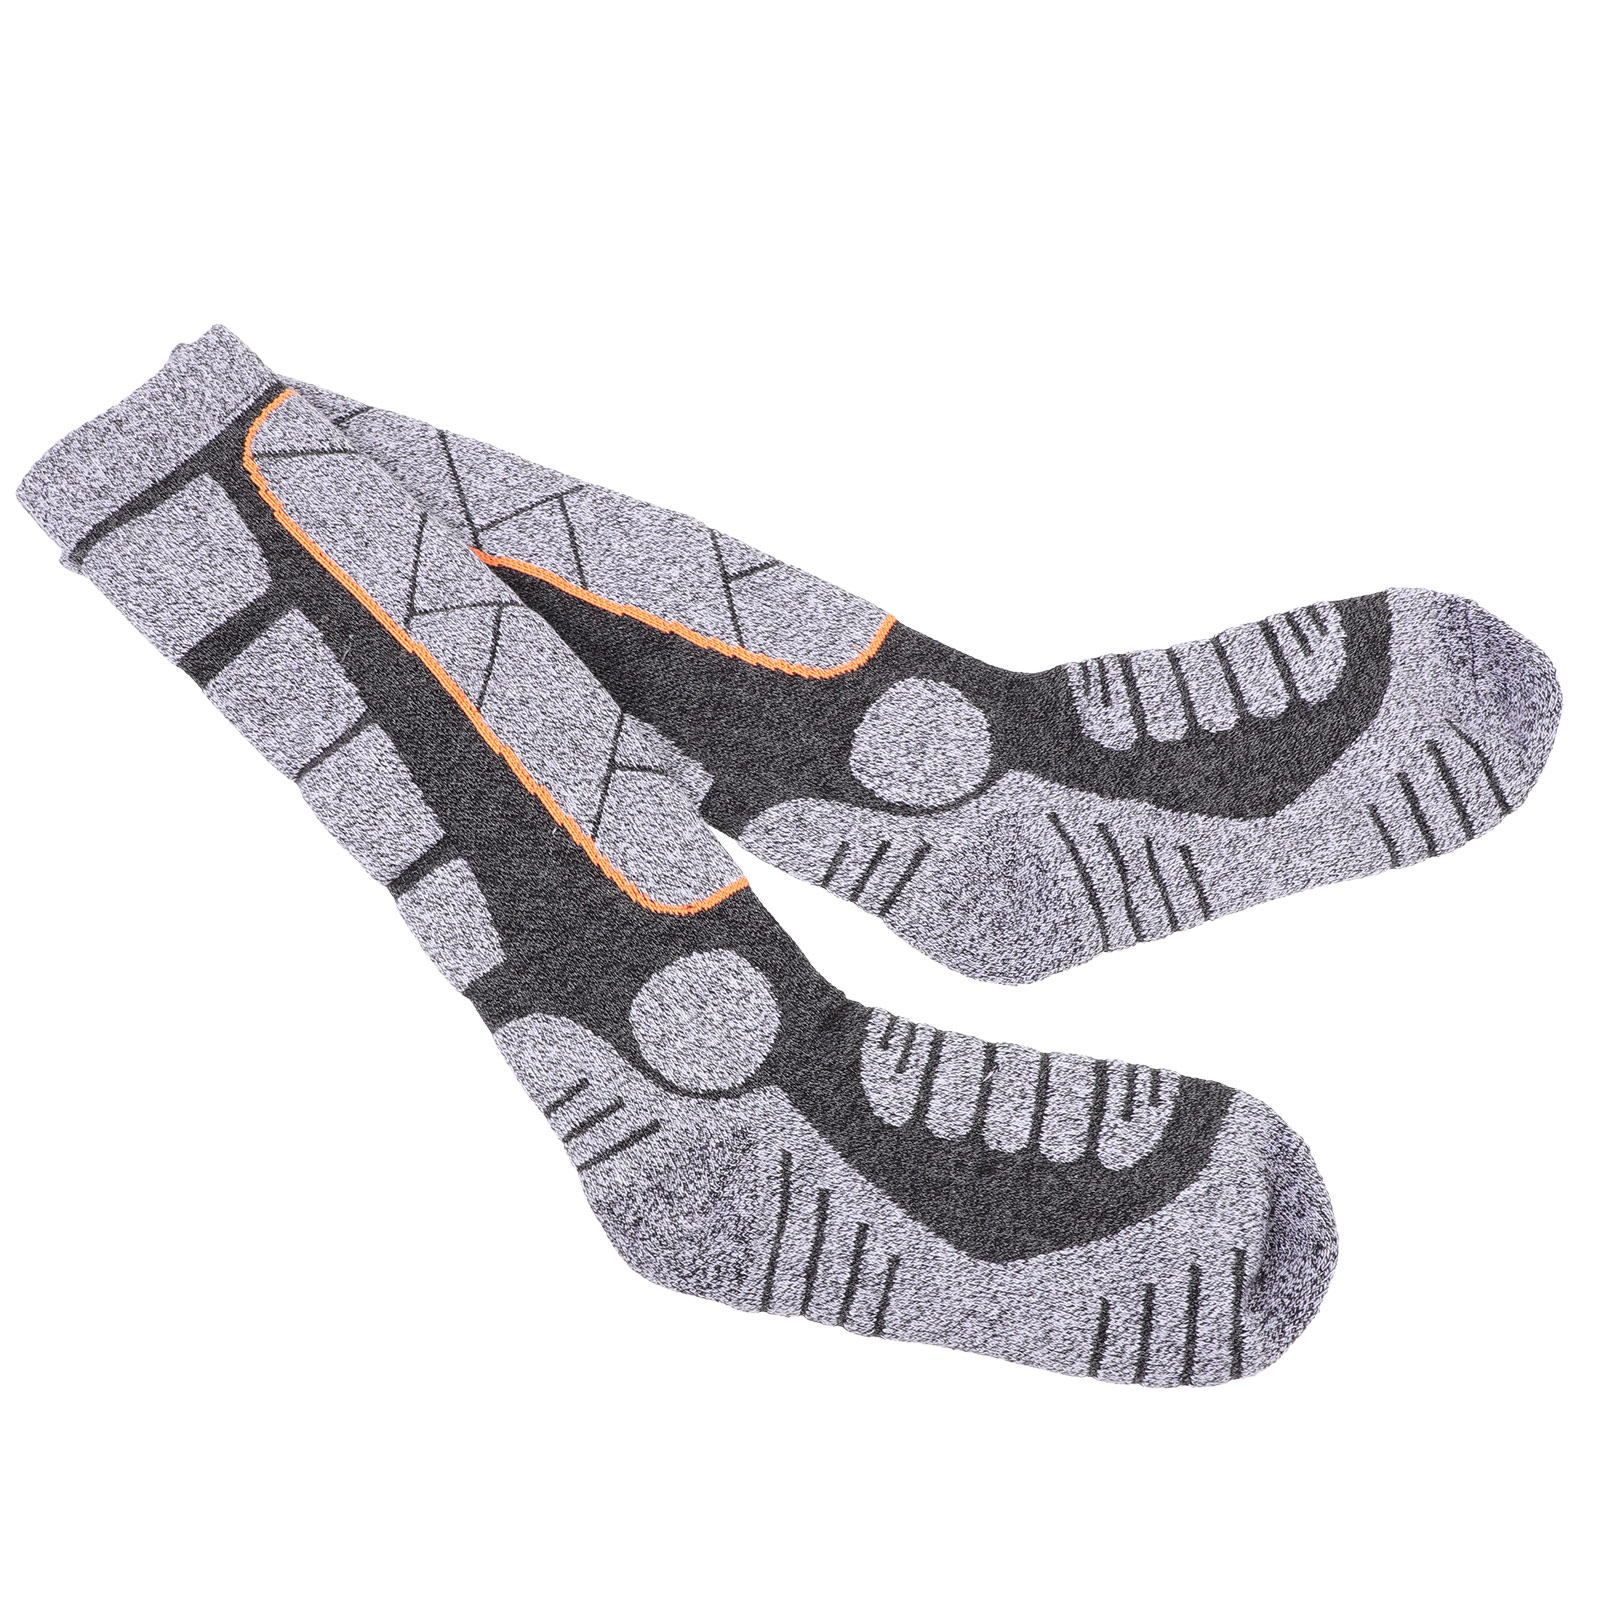 Zonh Stockings Hiking Sock Outdoor Accessory Cotton Non Skid Socks for ...